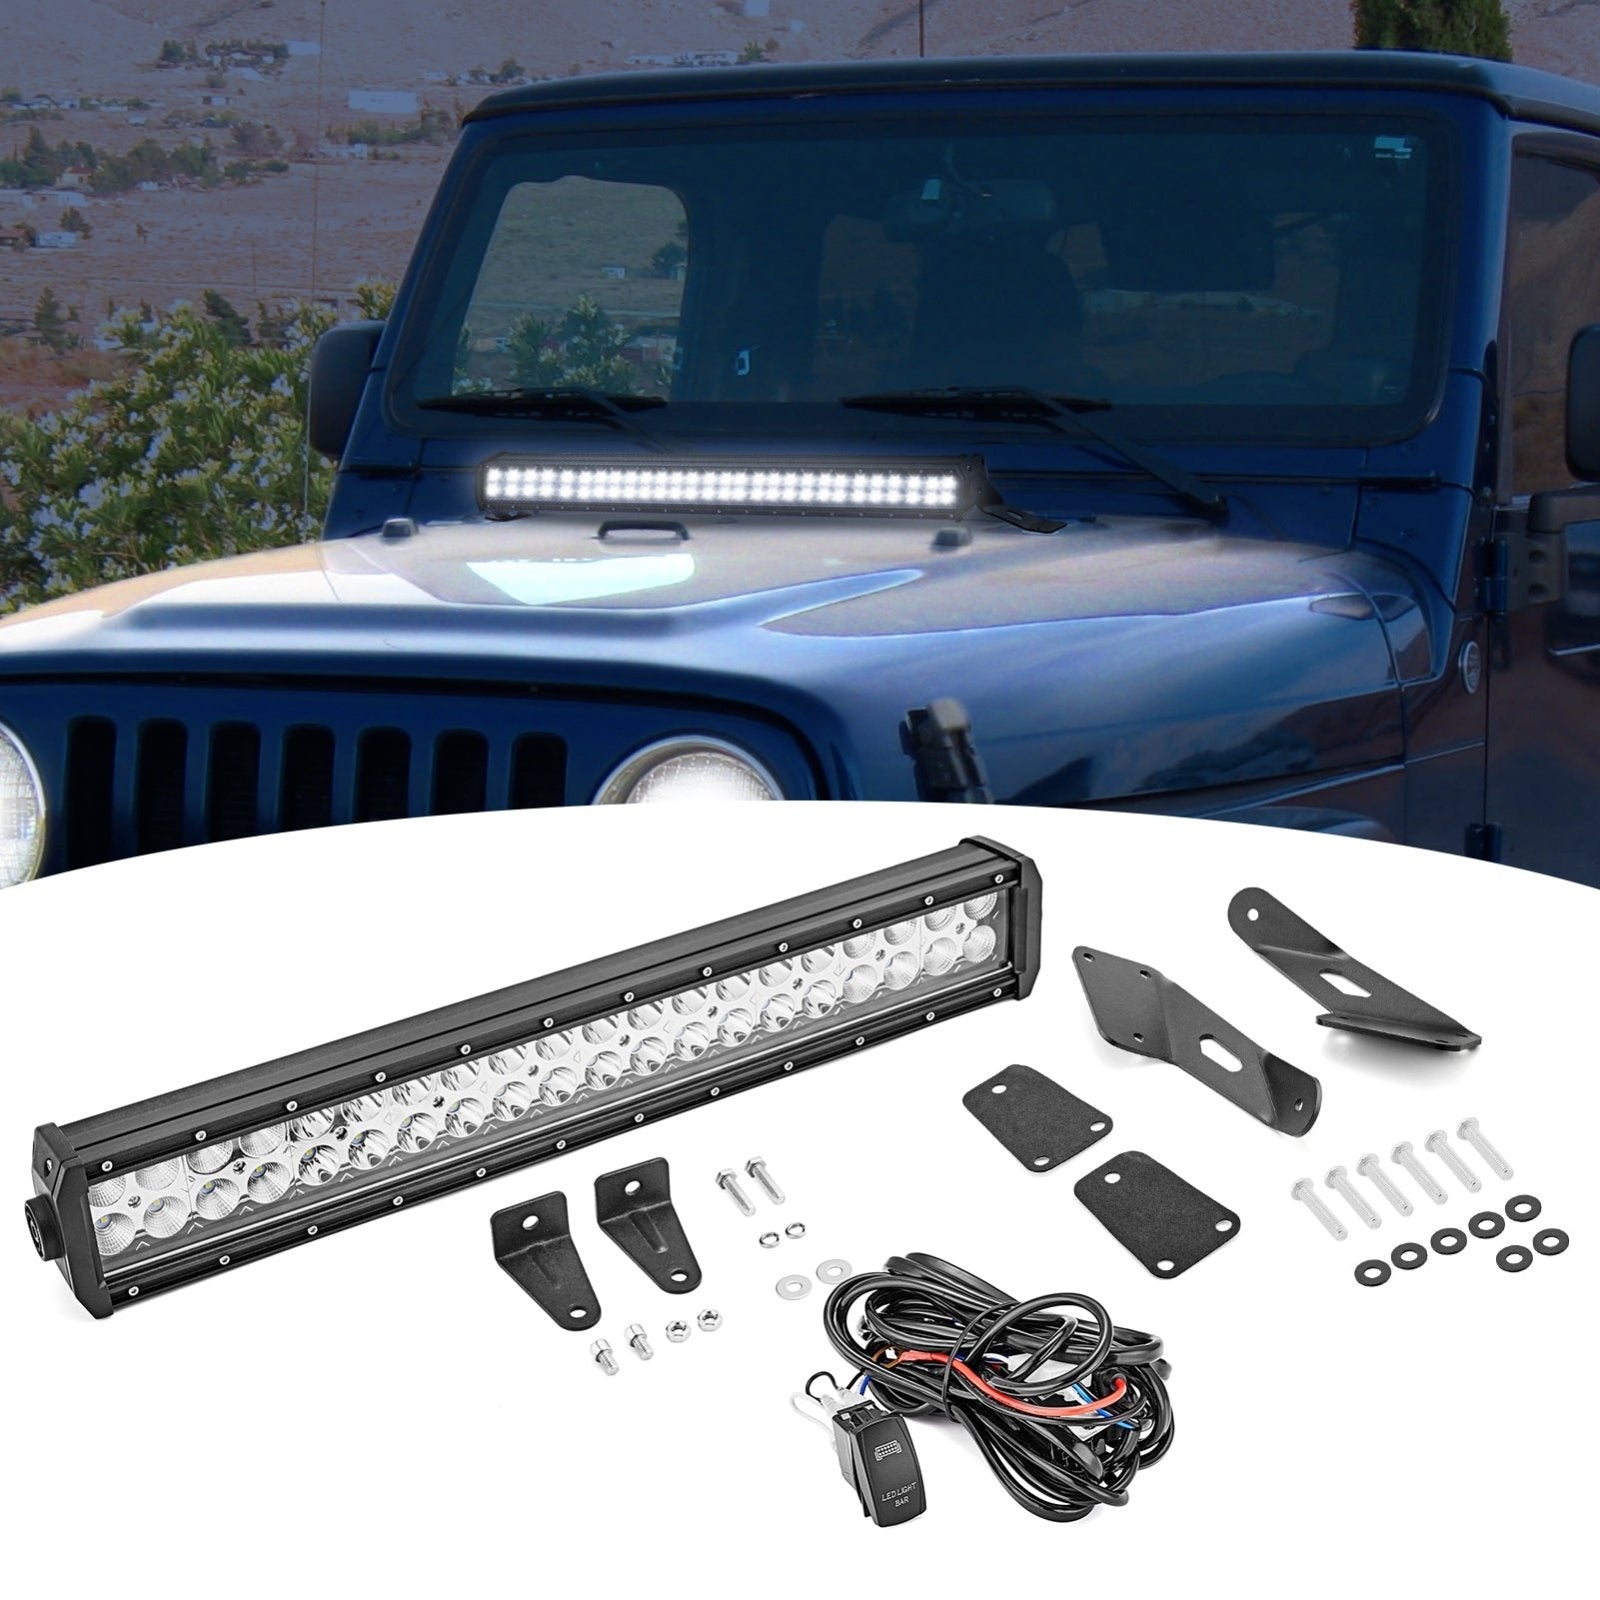 120W 22" Straight LED Light Bar and Upper Hood Brackets with Wiring Kit For Jeep Wrangler TJ 4WD、LJ4WD - Weisen